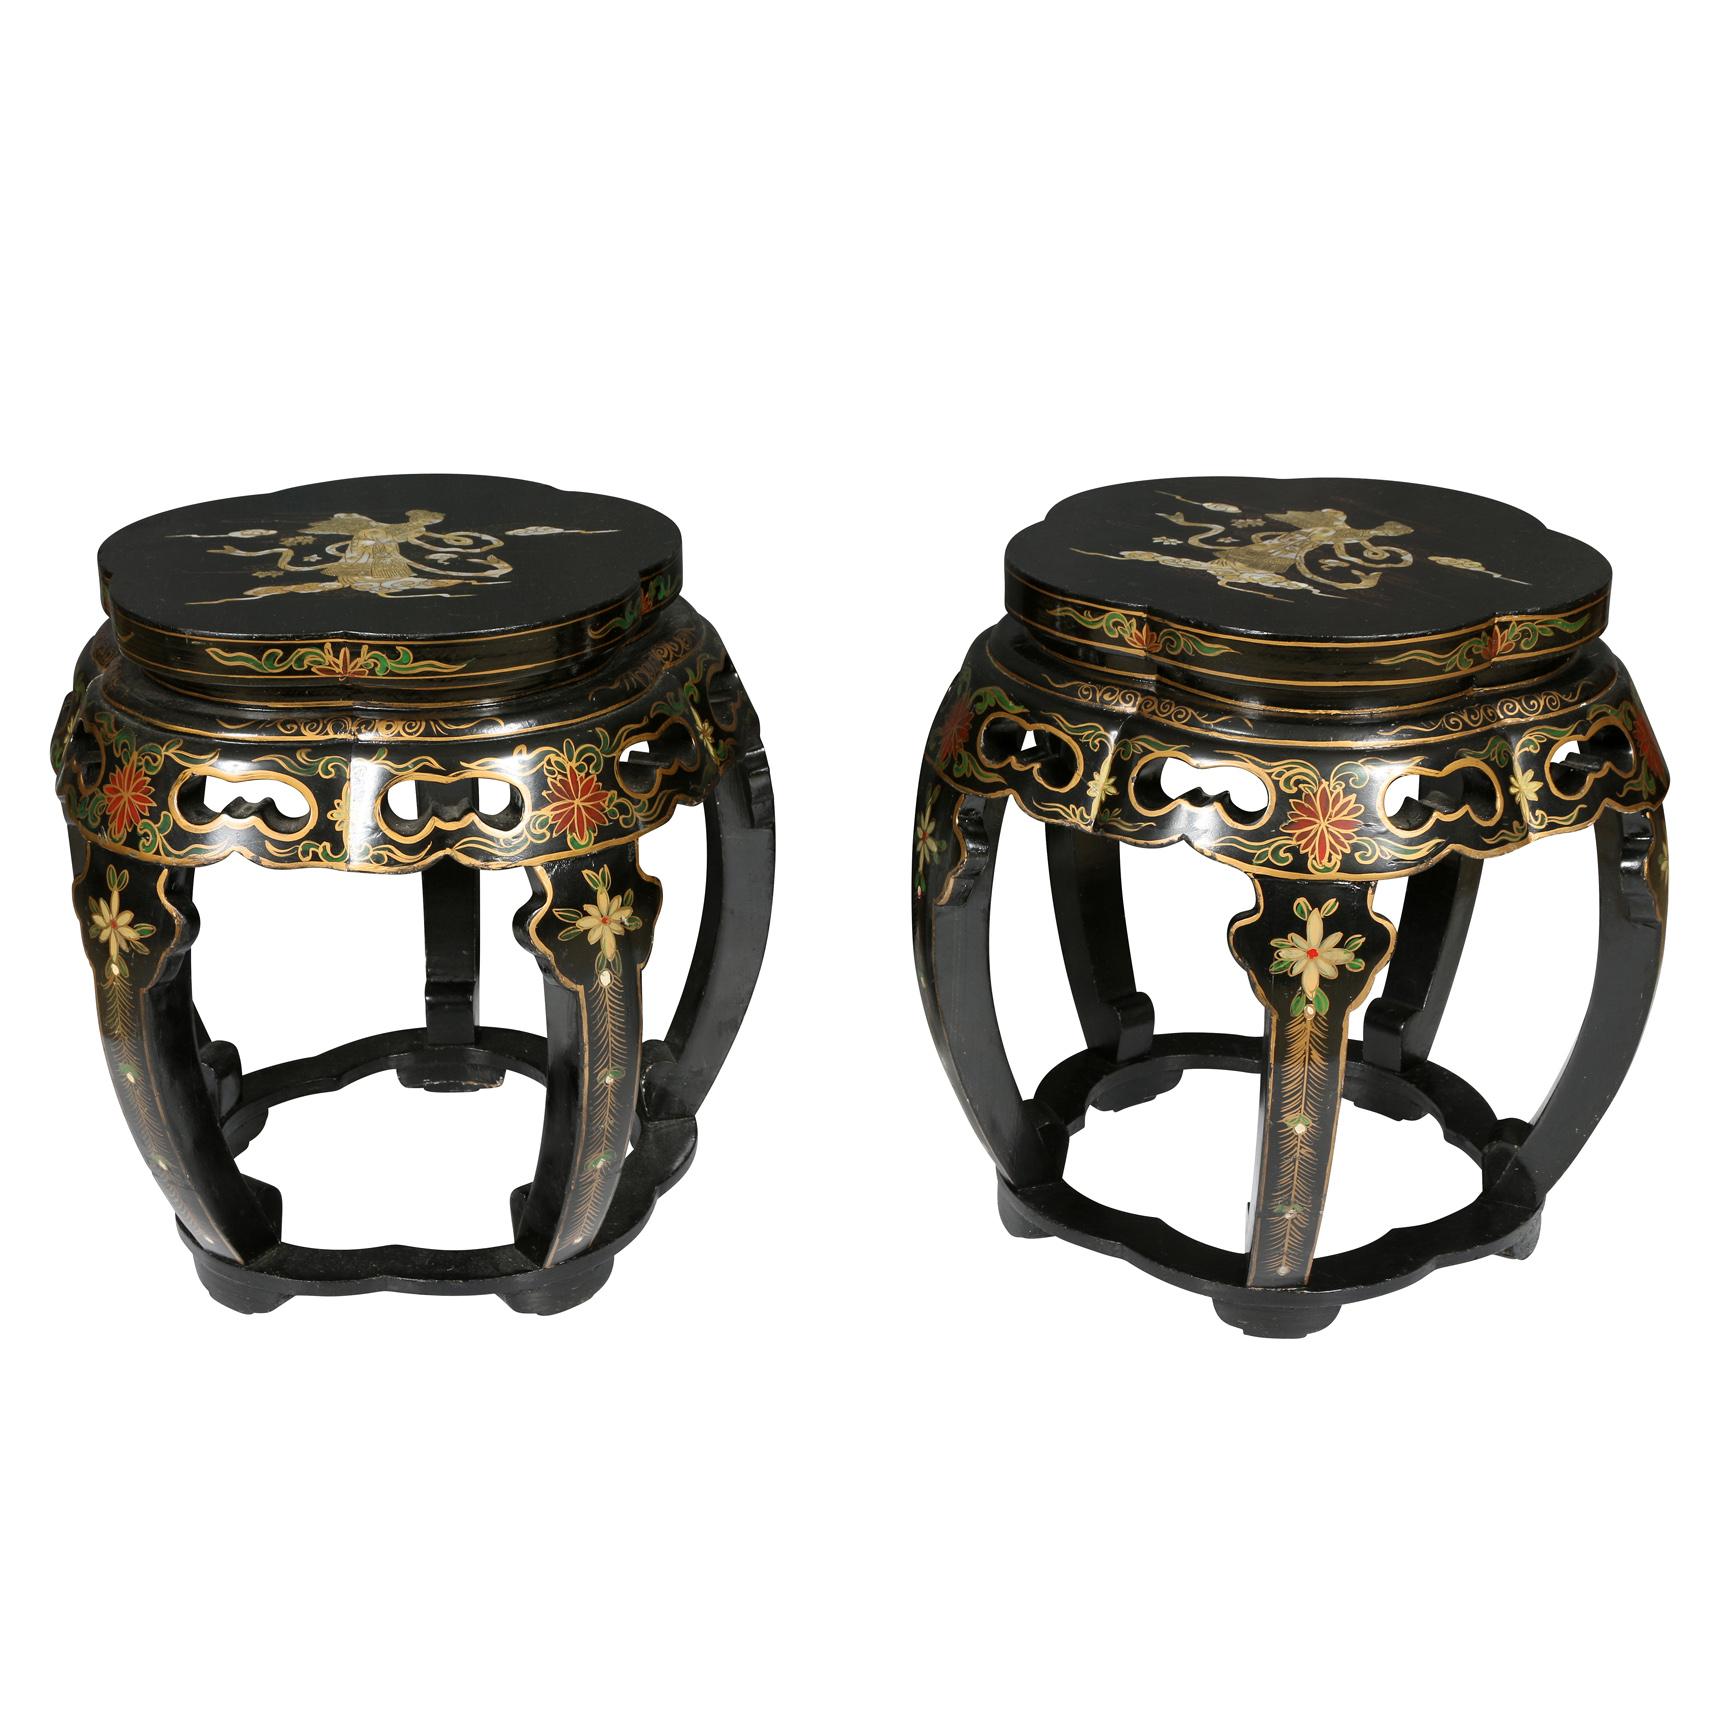 20th Century Pair of Black Lacquered Mother of Pearl Inlay Tabourets